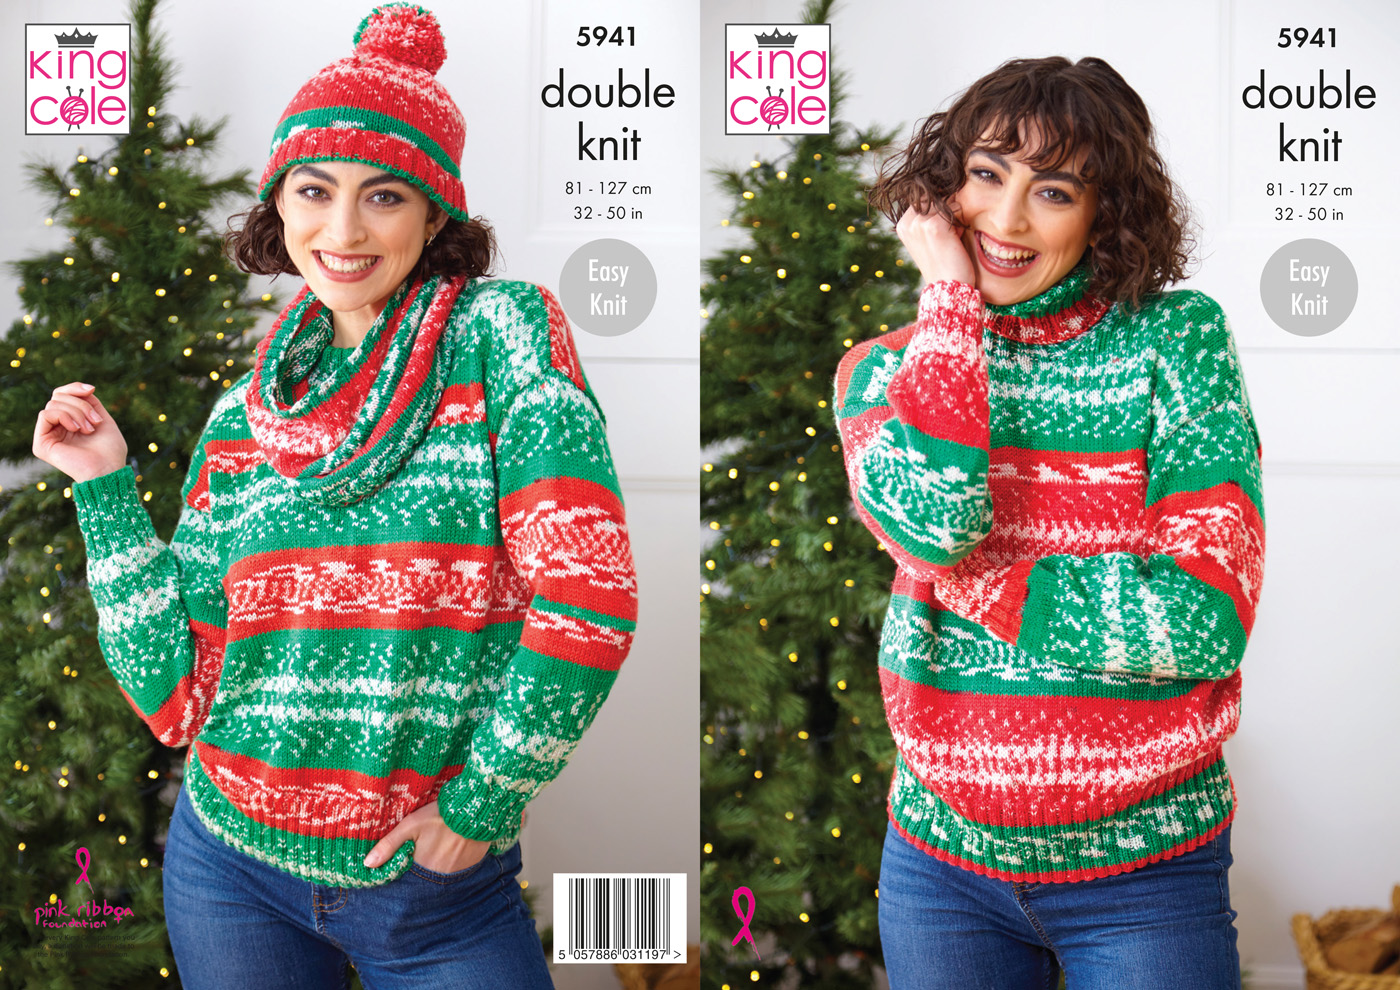 Sweaters, Cowl And Hat: Knitted in King Cole Fjord DK Festive 5941